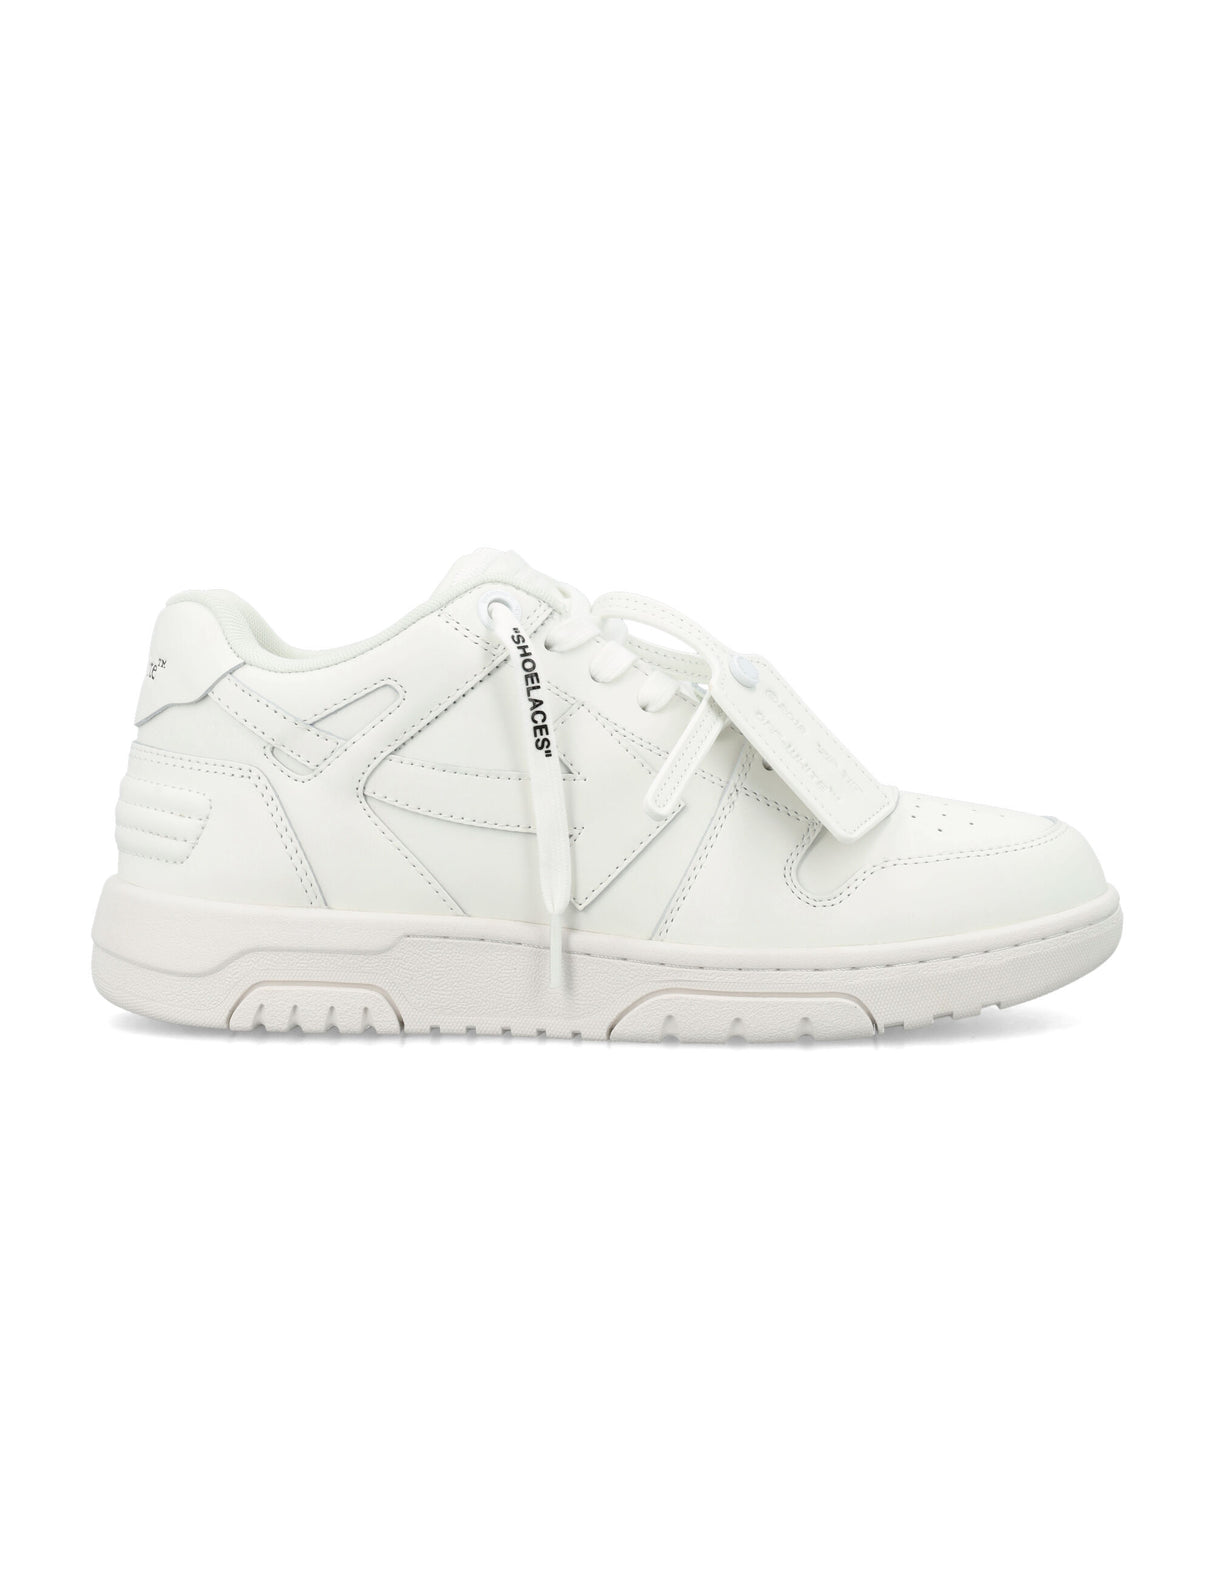 OFF-WHITE OUT OF OFFICE 100% Leather LEATHER Sneaker